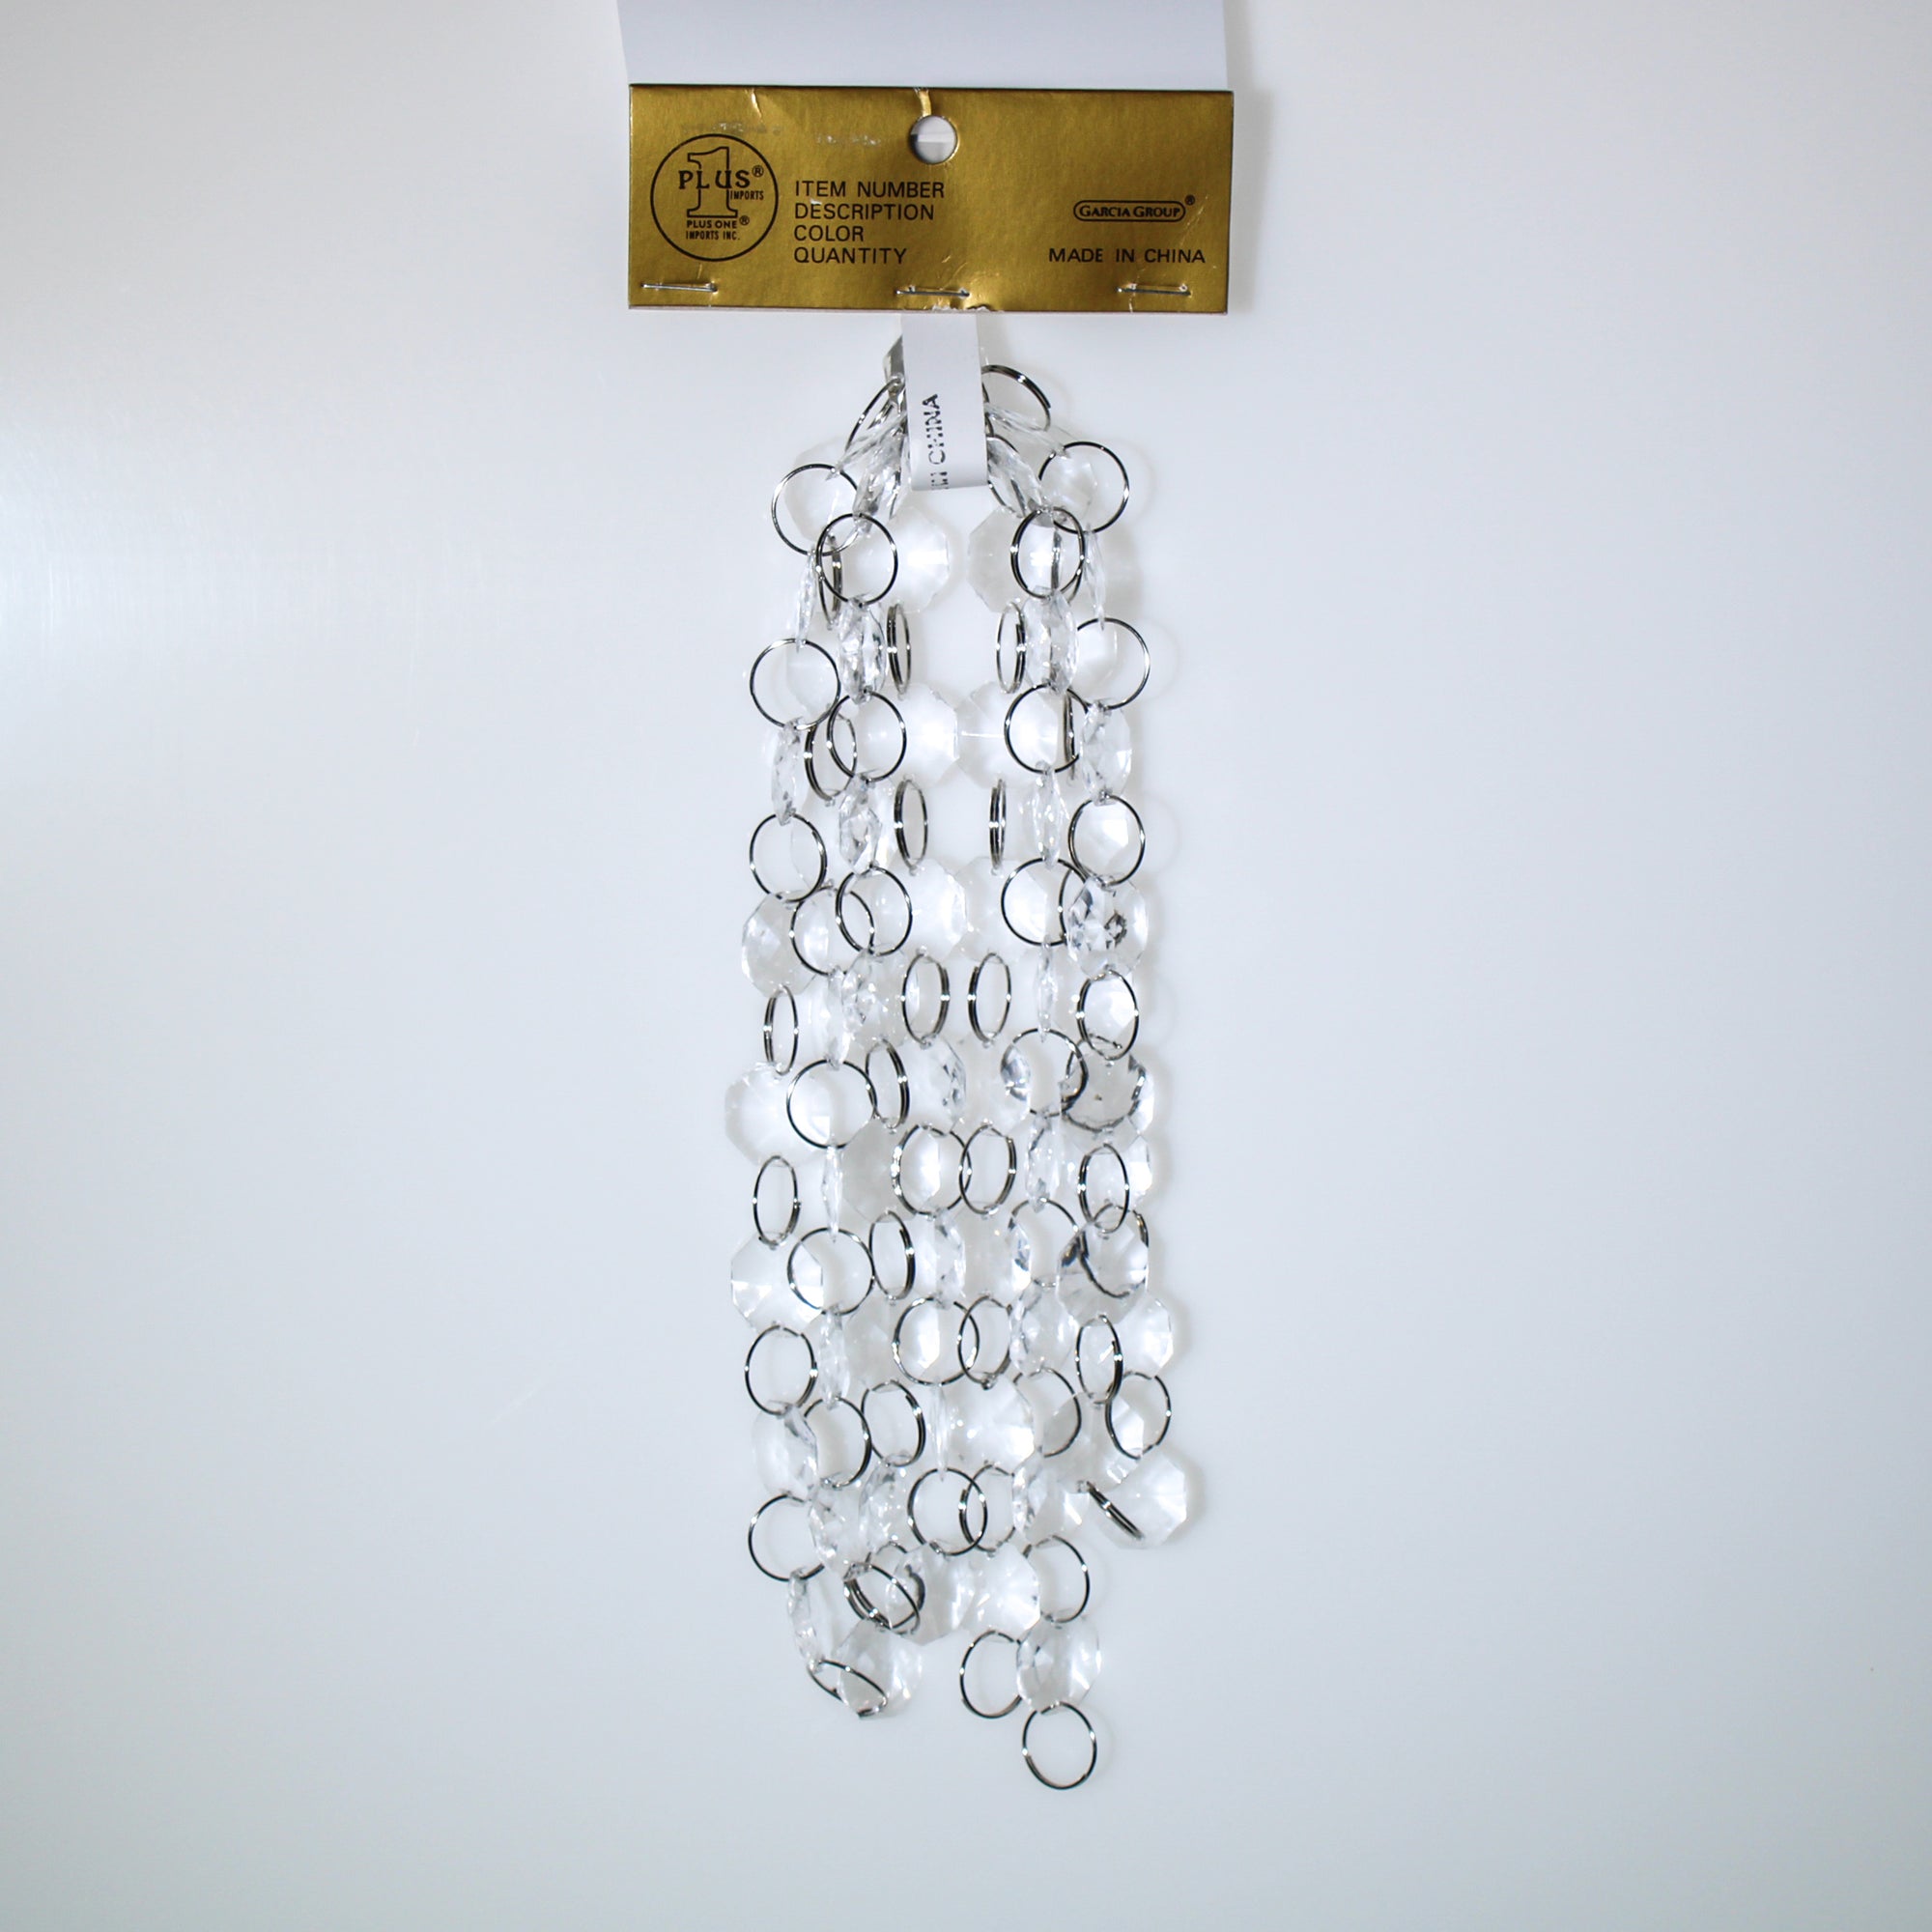 22 Yard - Clear with Chrome Pin Crystal Garland Chain 1080-14 MM